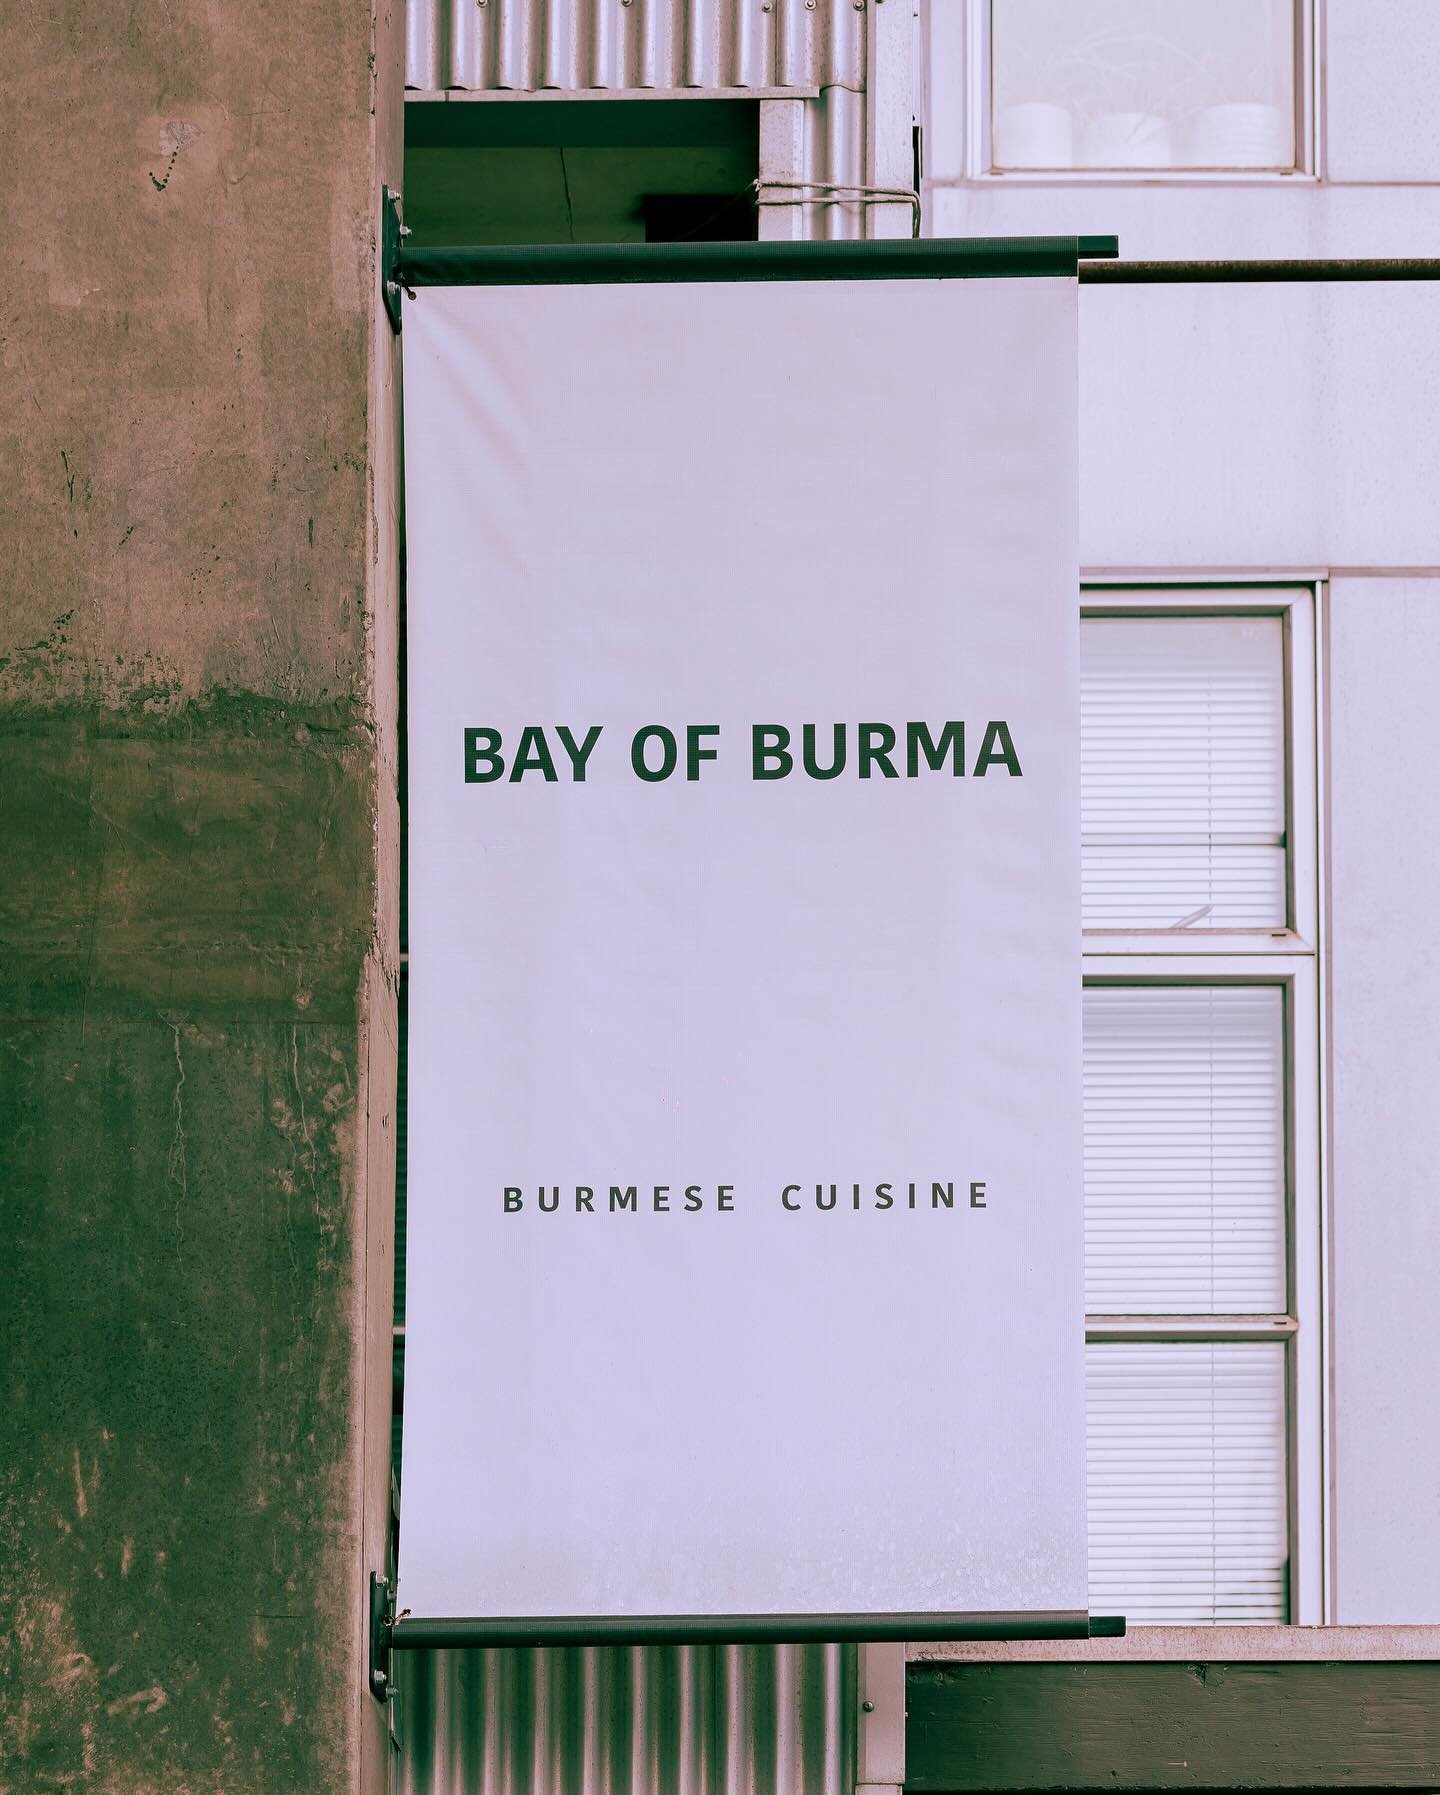 Happy Friday everyone! Hope to see you guys this weekend at Bay of Burma 😊 Come by and try authentic and delicious Burmese cuisine!

📍Bay of Burma, San Francisco off Folsom St
Hours: 11:30am-2:30pm, 5pm-9pm, closed Sundays 

#burma #burmese #burmes